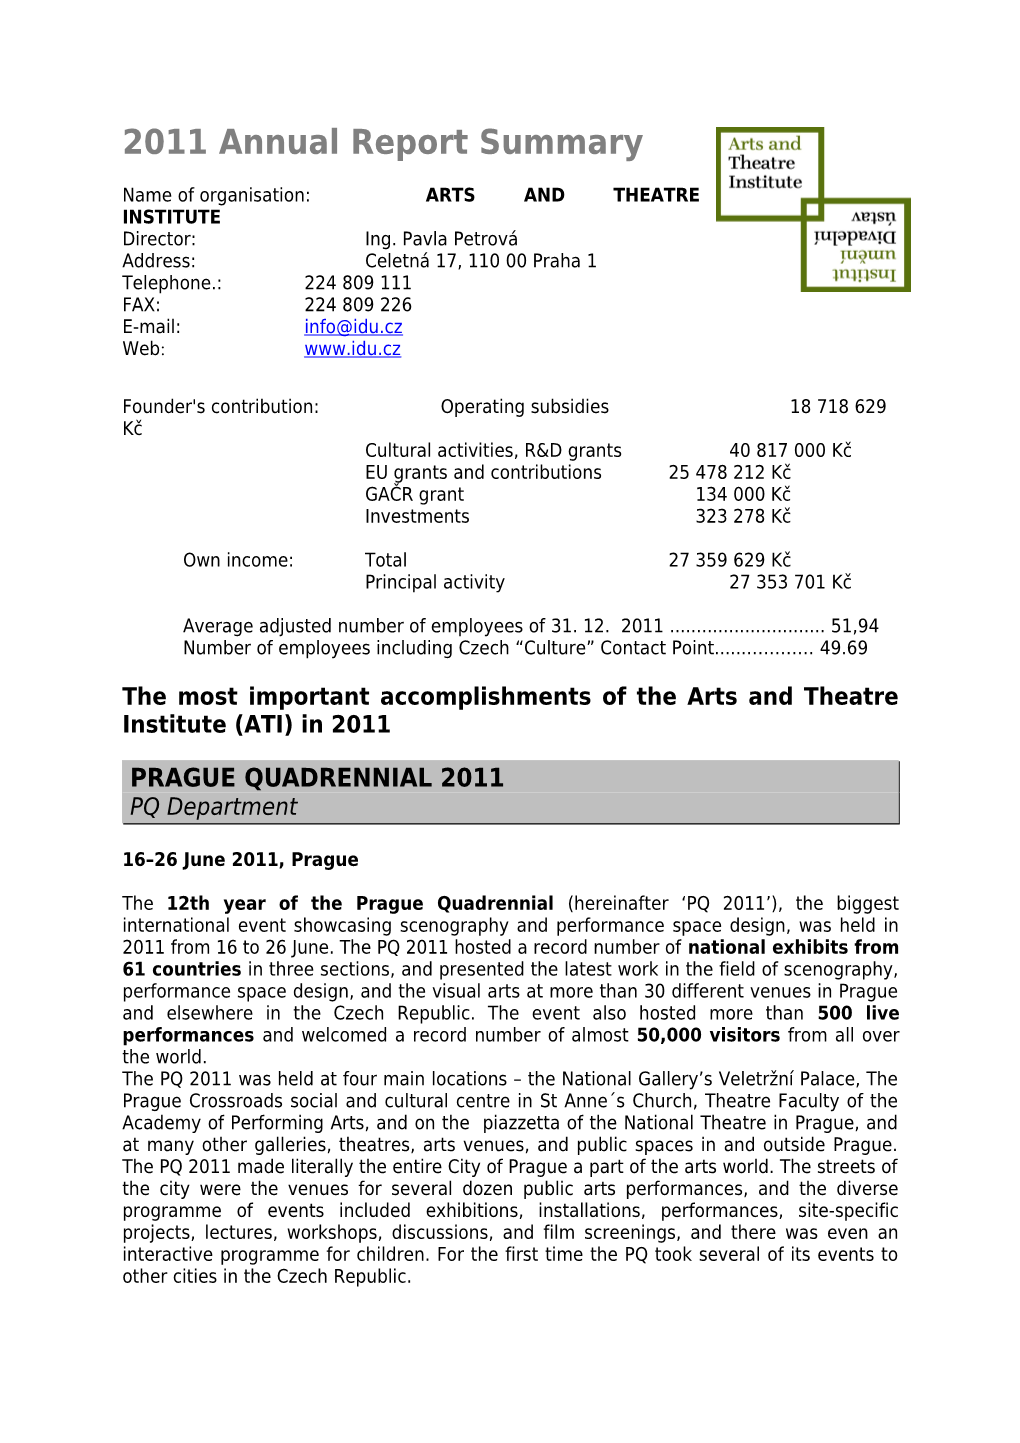 Name of Organisation: ARTS and THEATRE INSTITUTE